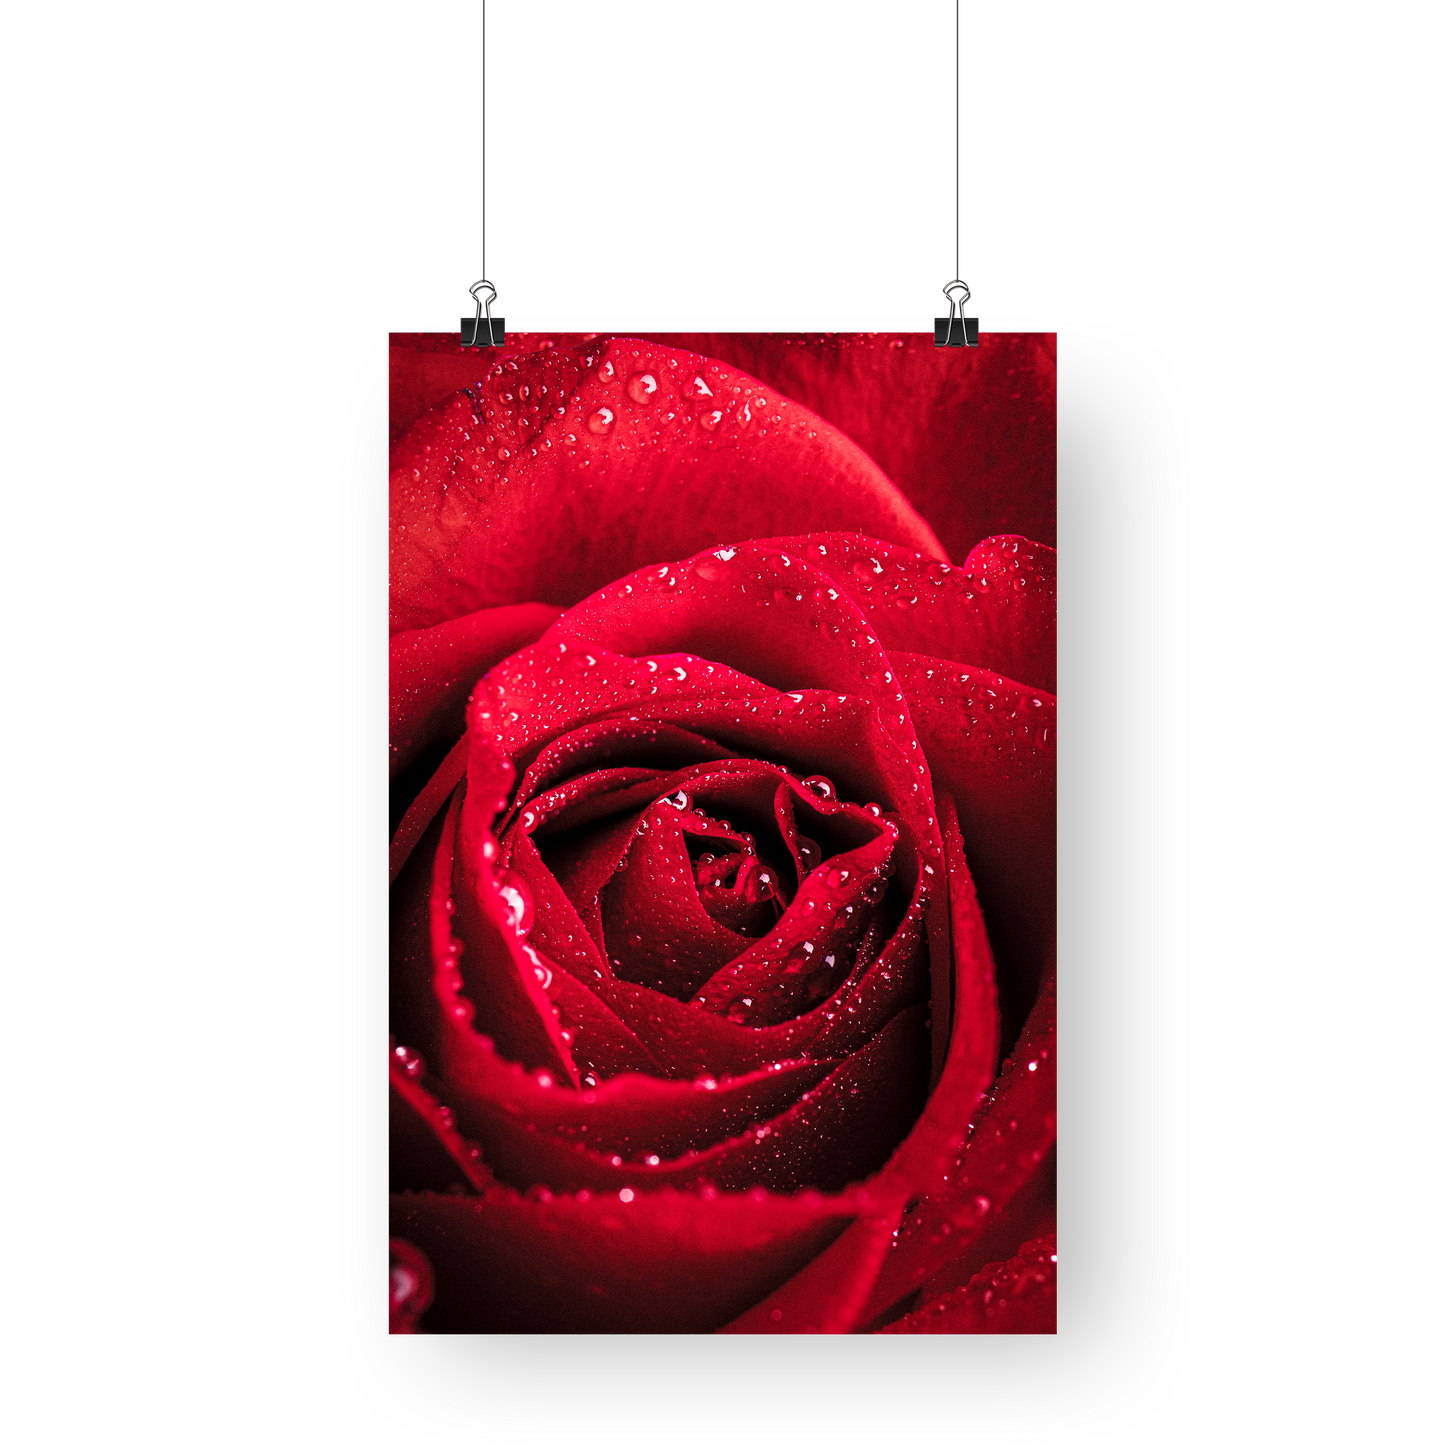 Lovers Paradise -  Still Life Photography Floral Fine Art - Wall Art Metal or Acrylic Print